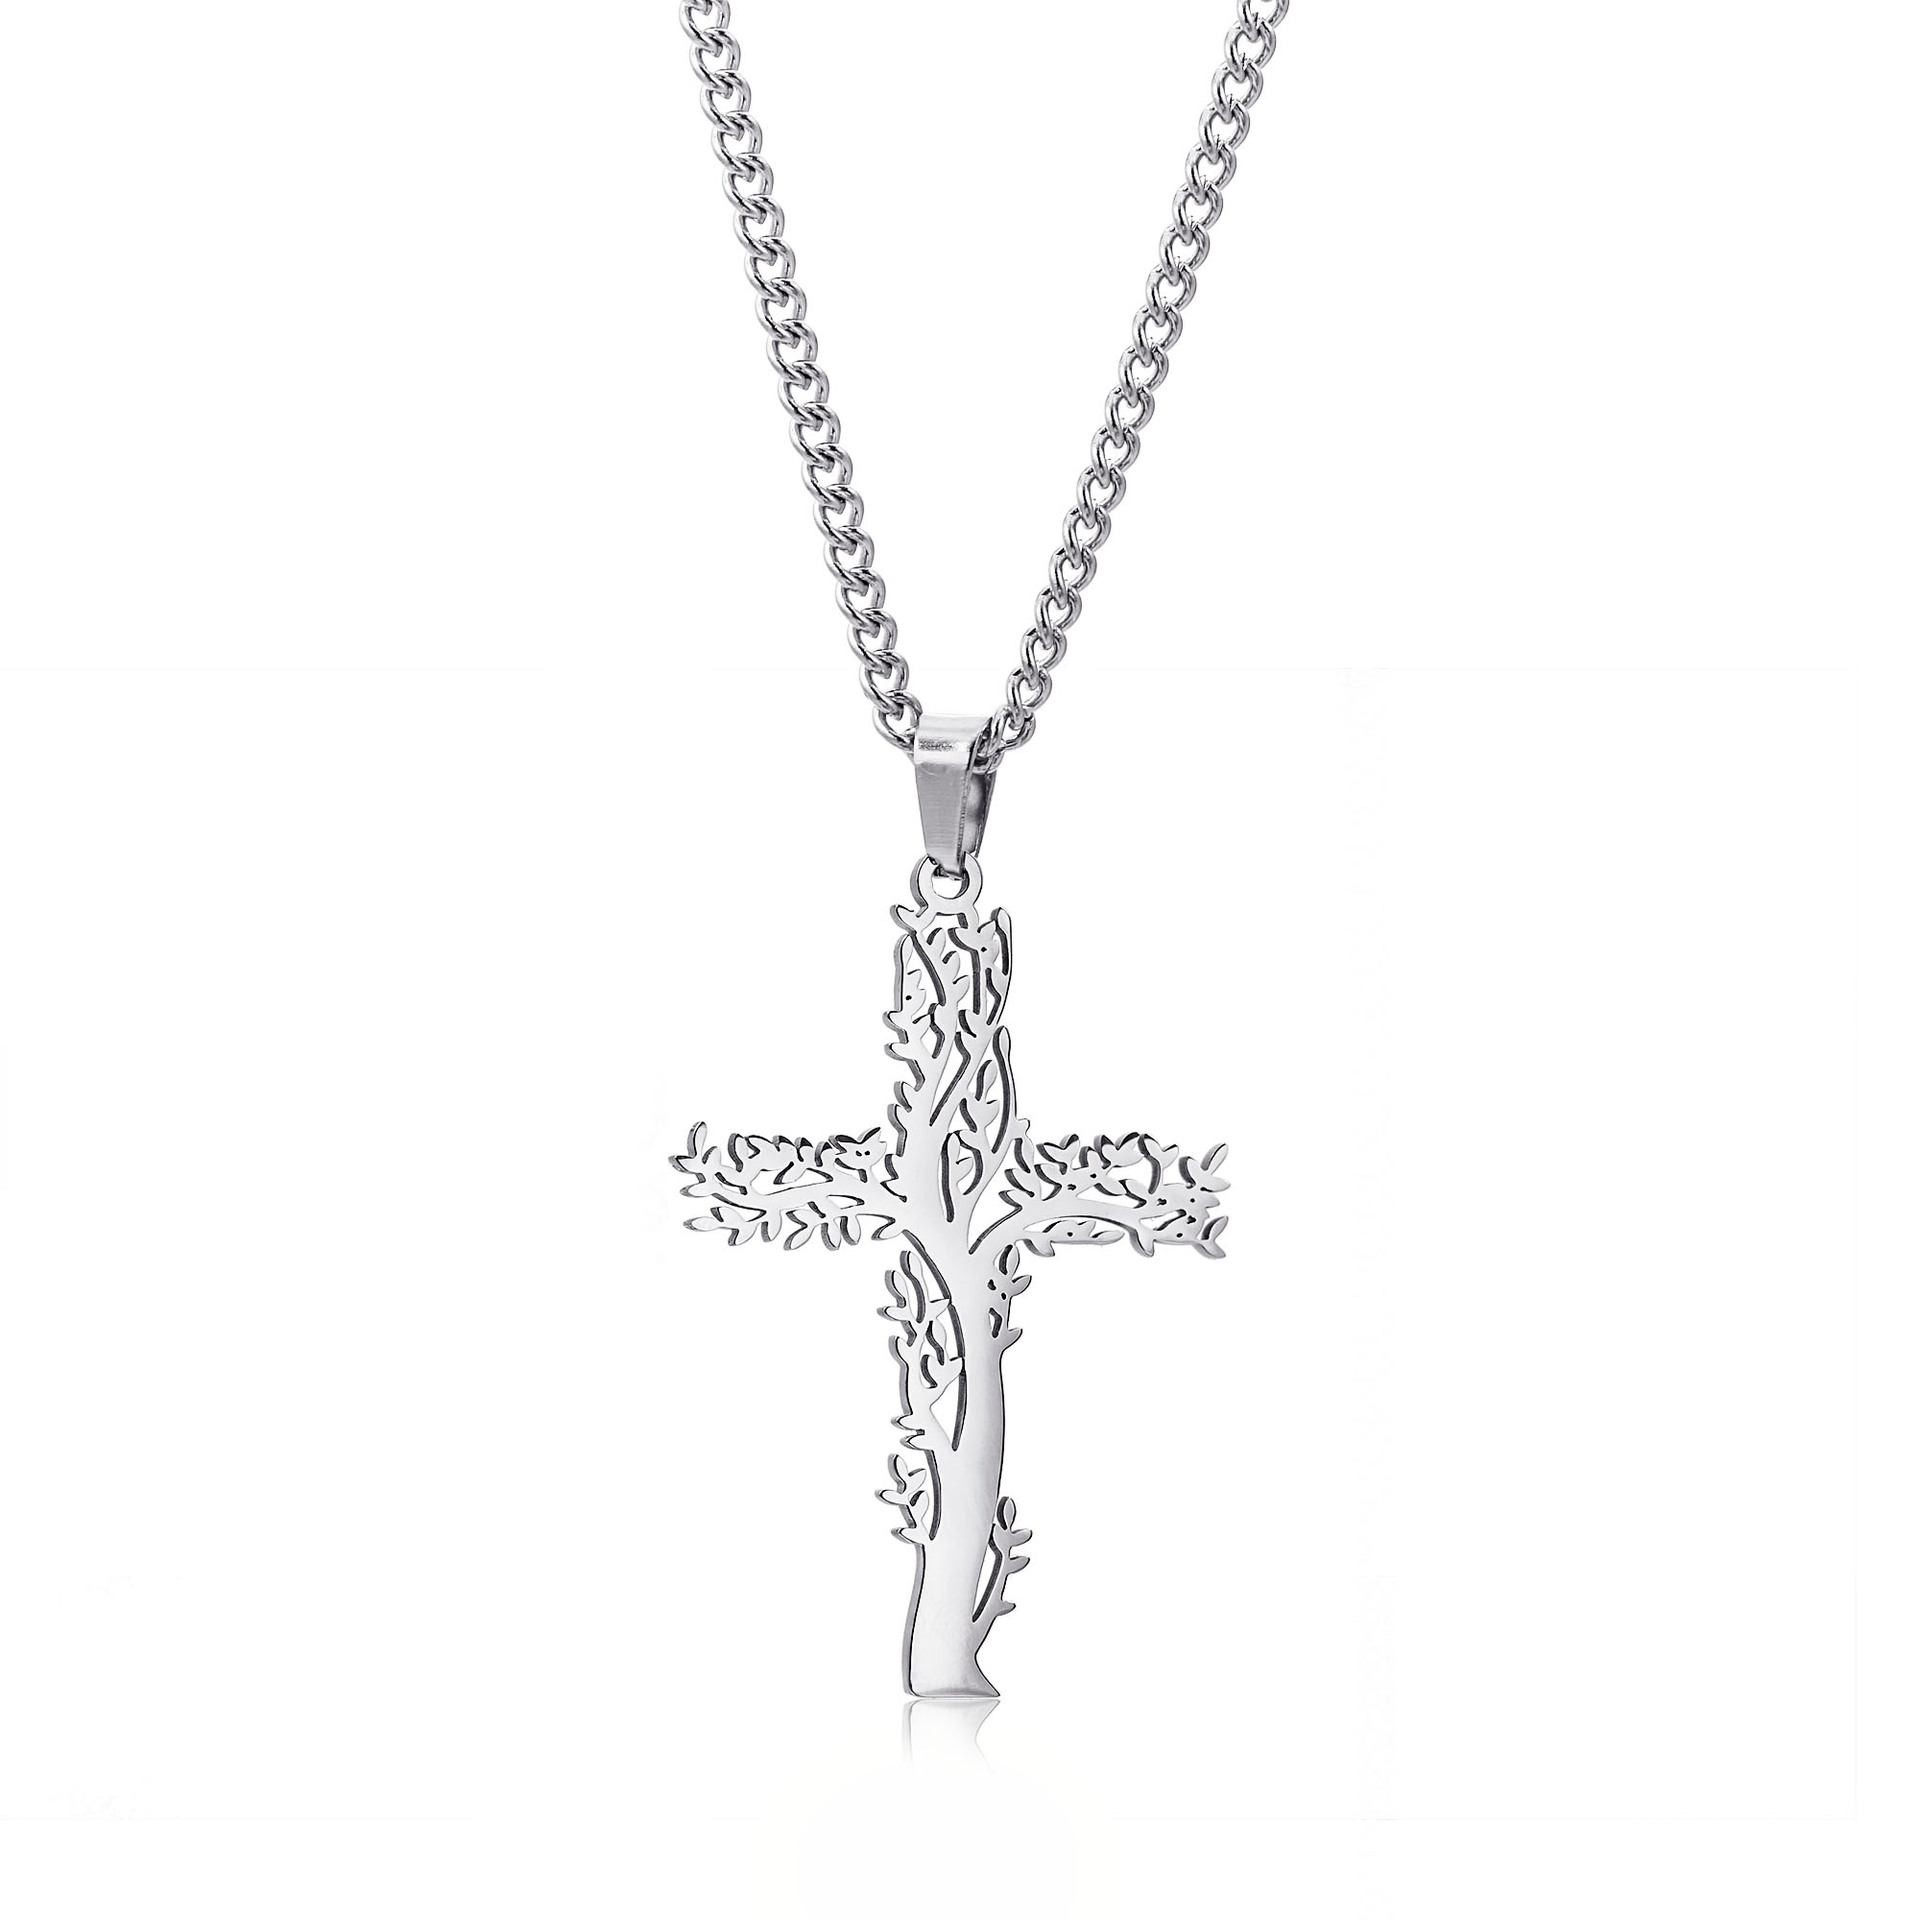 Tree of Life Cross Pendant Necklaces Men Relivion Faith Crucifix Charm Decoration Chain for Women Jewelry Gift